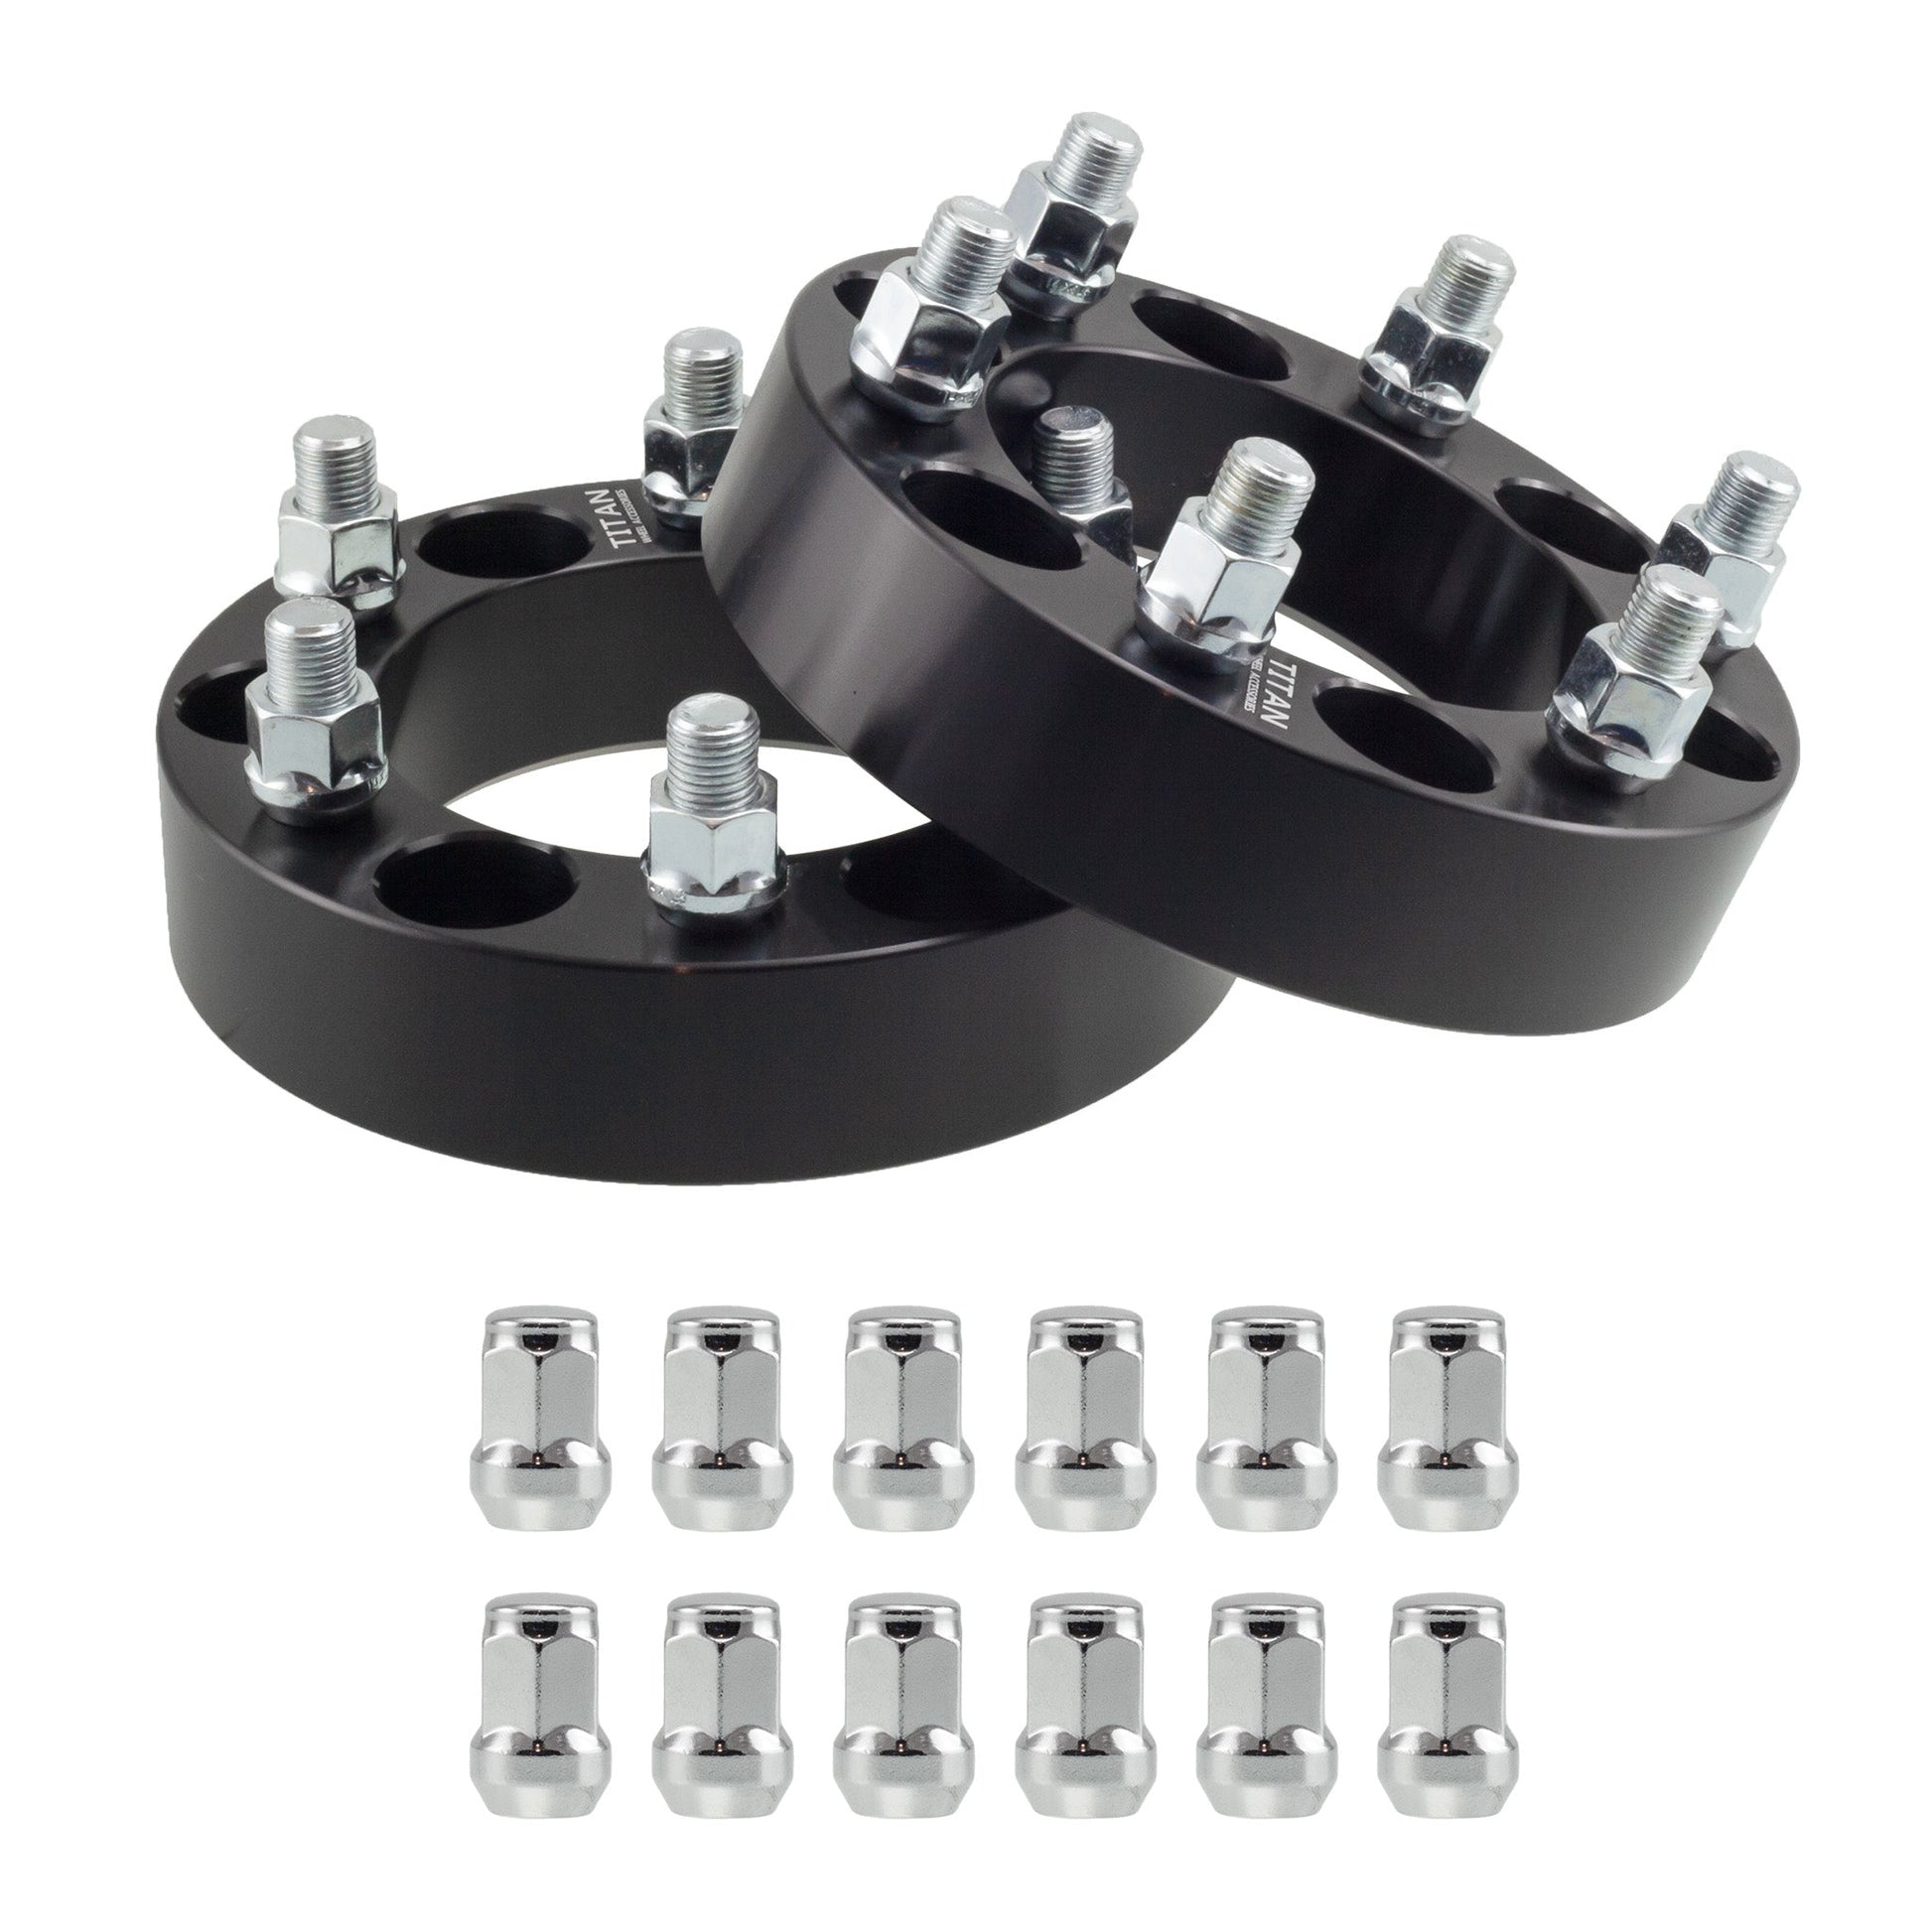 2" (50mm) Titan Wheel Spacers for Ford Expedition F150 Lincoln Navigator | 6x135 | 87.1 Hubcentric |14x2 Studs | Titan Wheel Accessories